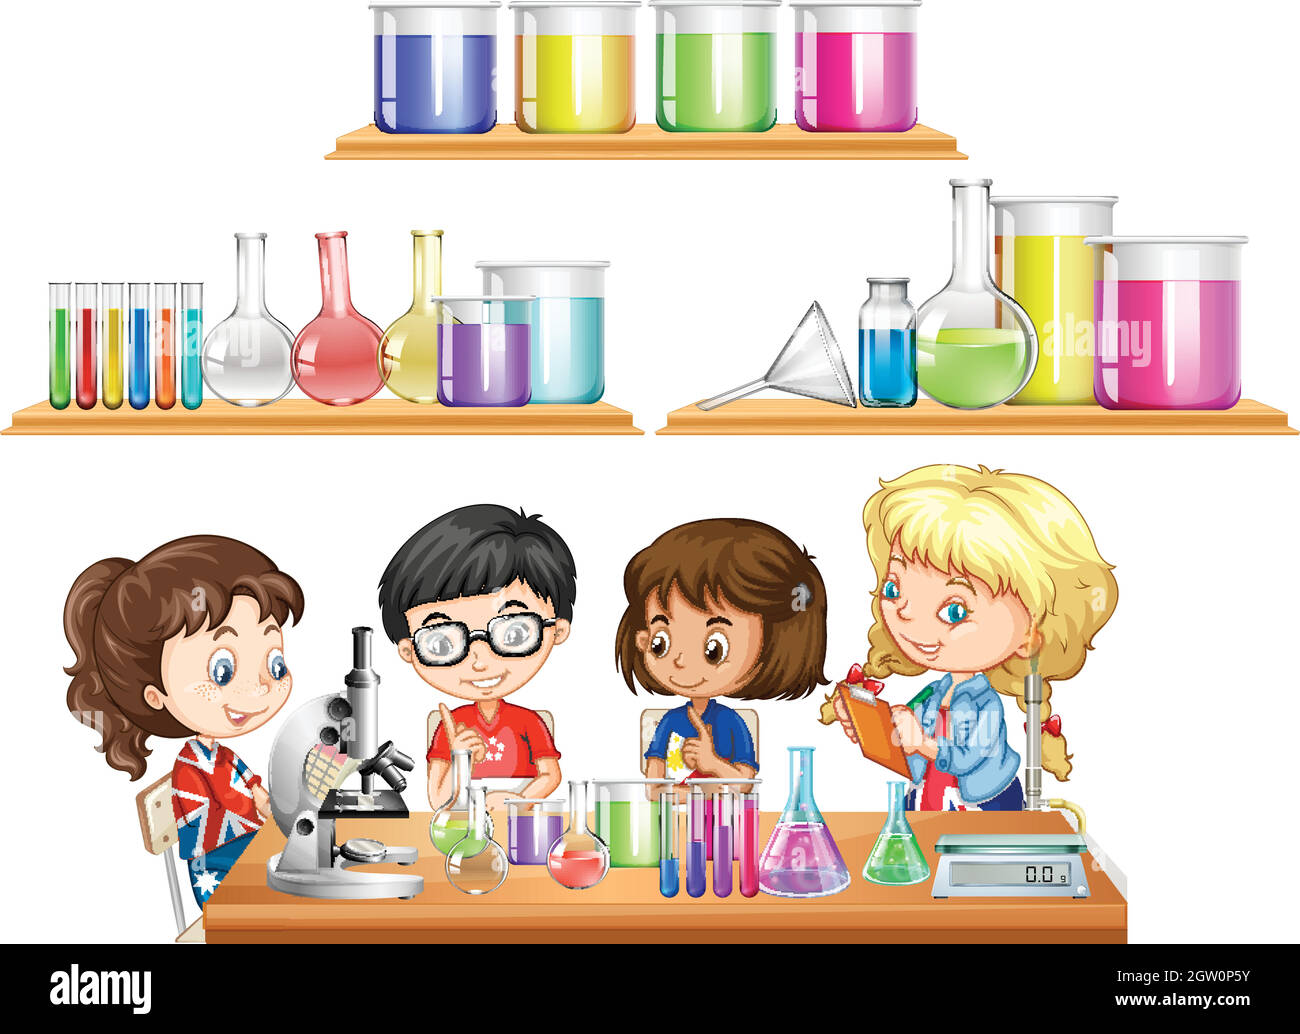 Kids doing science experiment and set of beakers Stock Vector